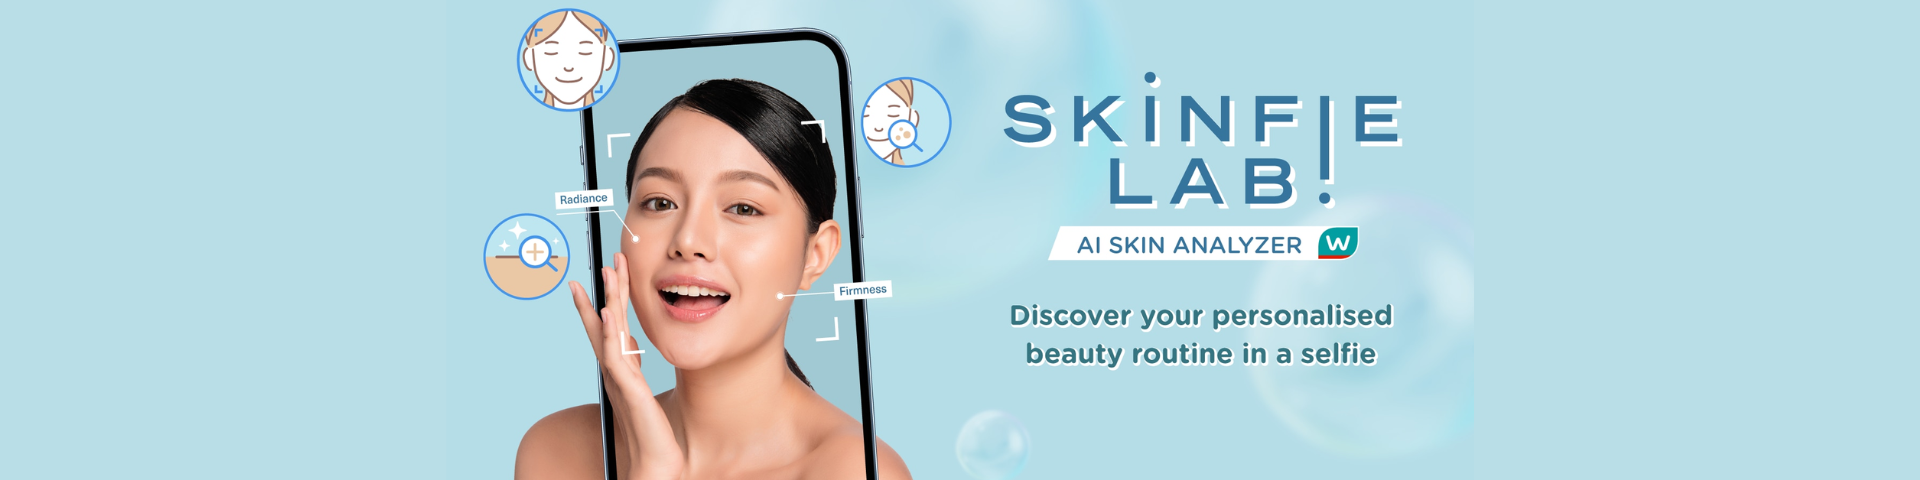 AS Watson Innovates AI-Powered Skincare Solutions with L’Oréal’s ModiFace in Asia